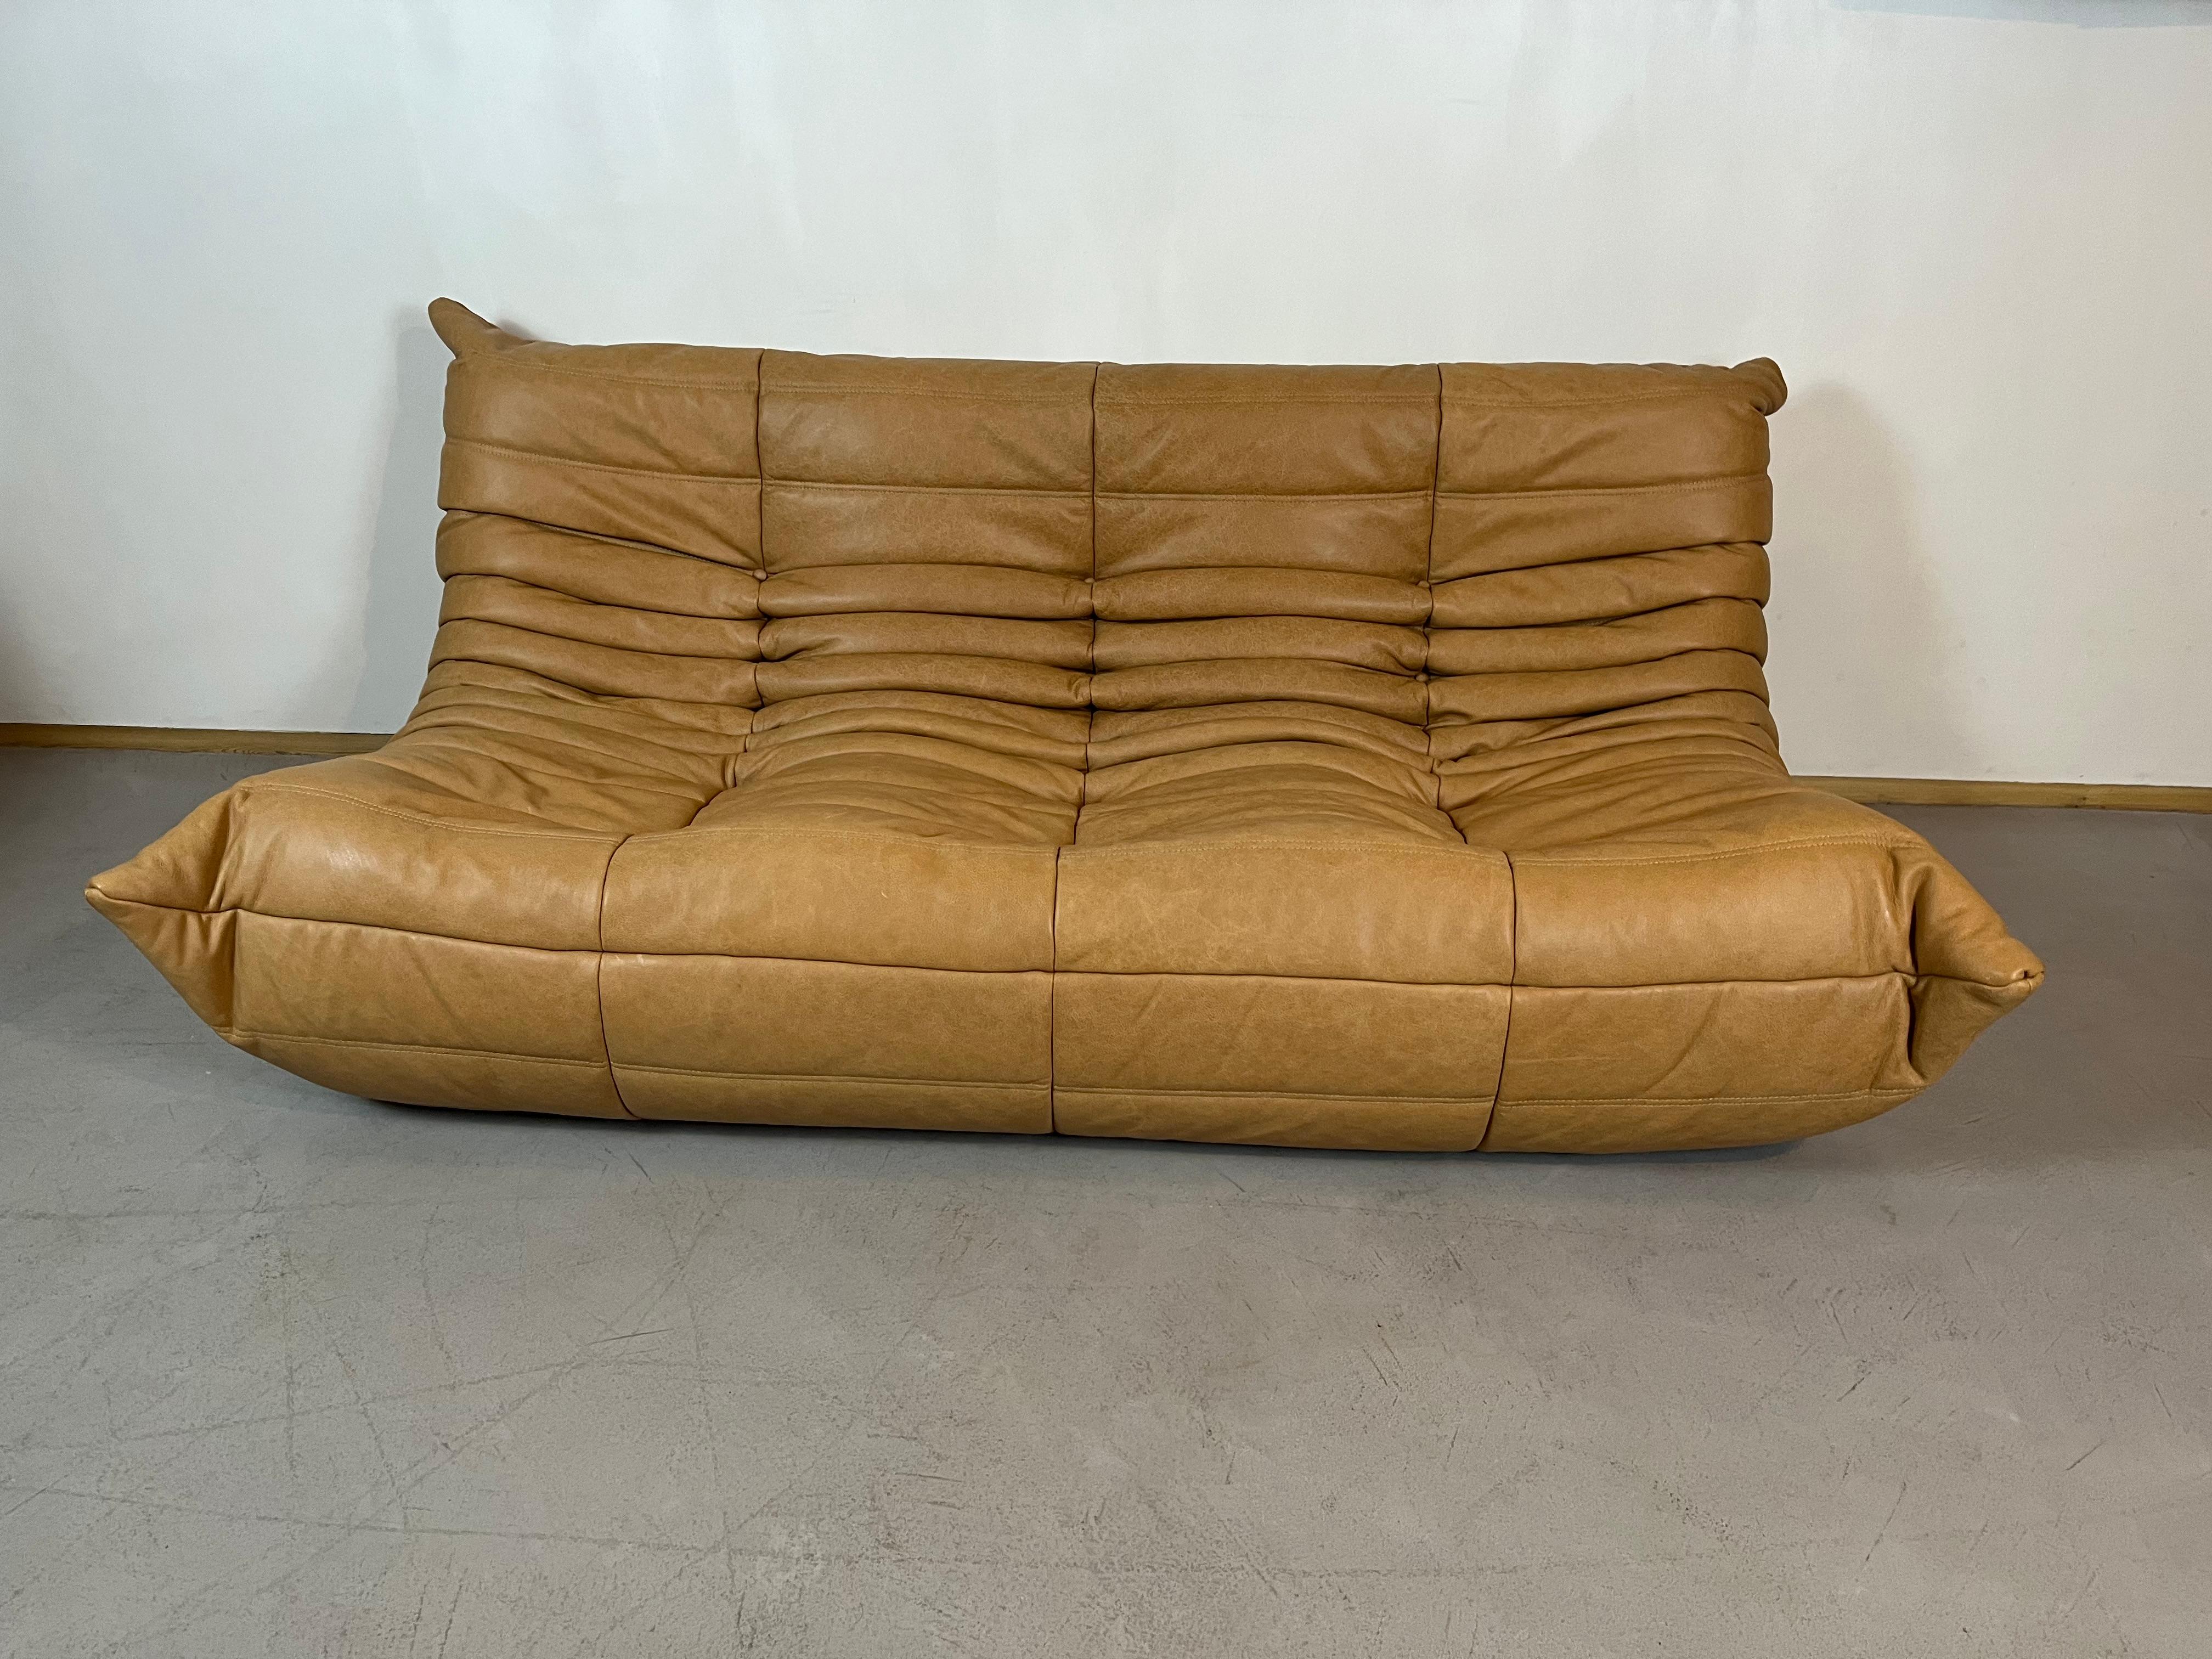 Togo sofa by Michel Ducaroy for Ligne Roset. 5 pieces set
Togo was designed in 1973.
Five pieces set: three seater, twoseater, one seater, corner and pouf.
The sofa is upholstered in camel leather.
the set is very versatile, hte pieces can be